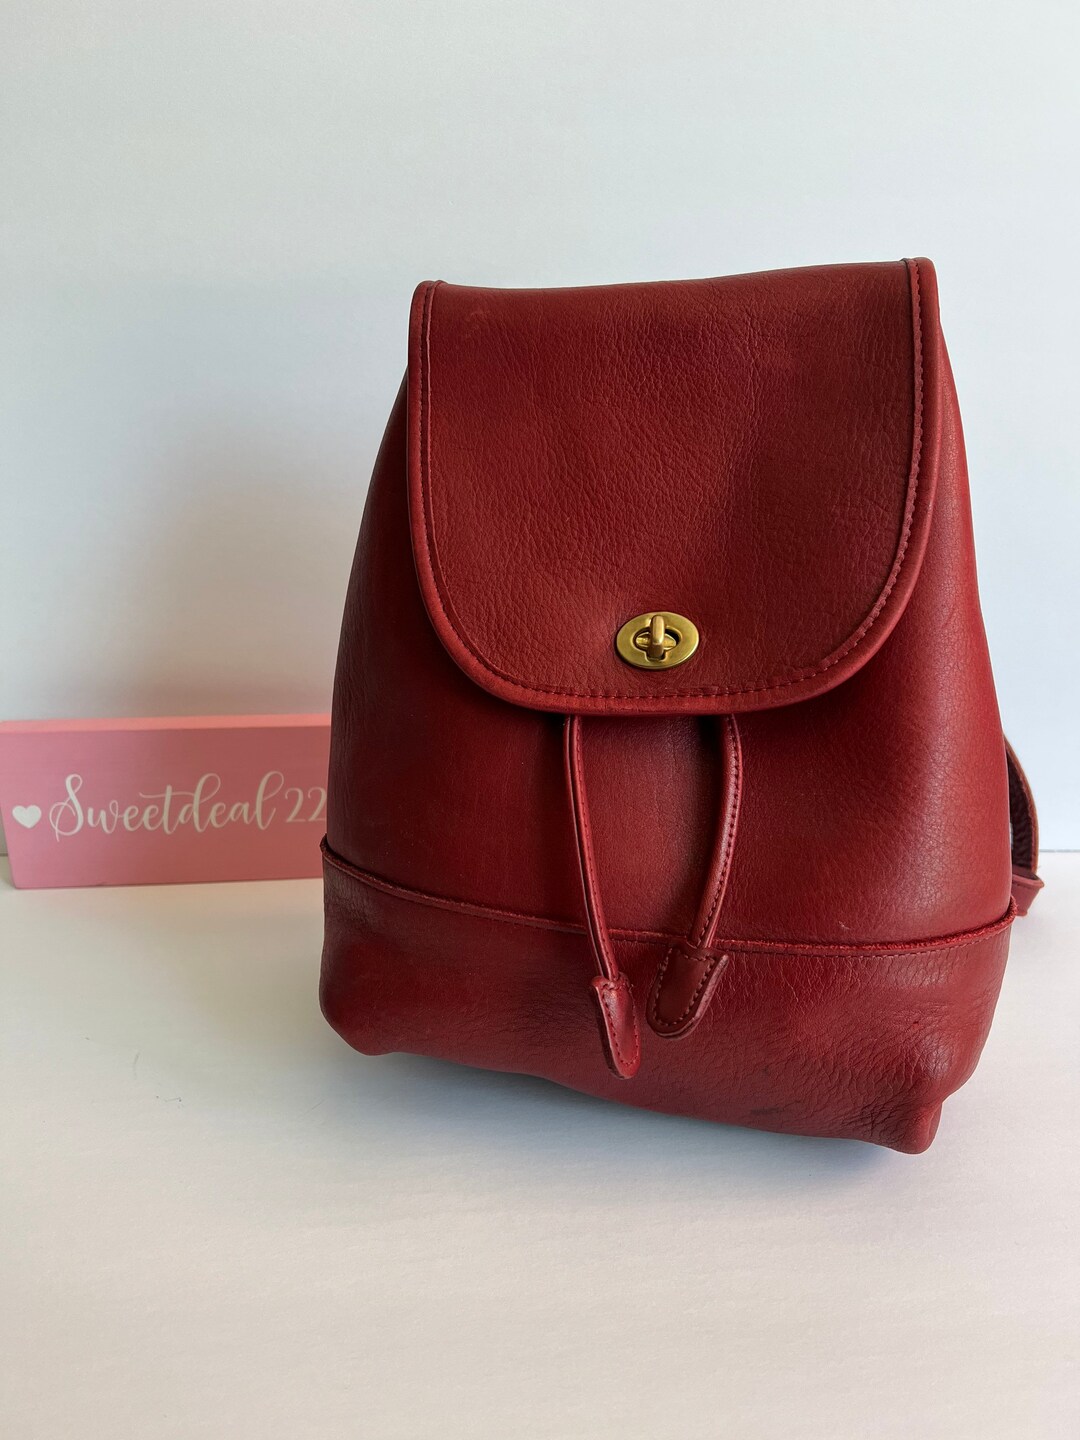 RARE Vintage COACH #9791 RED Daypack / MINI BACKPACK / Purse for Sale in  Chandler, AZ - OfferUp